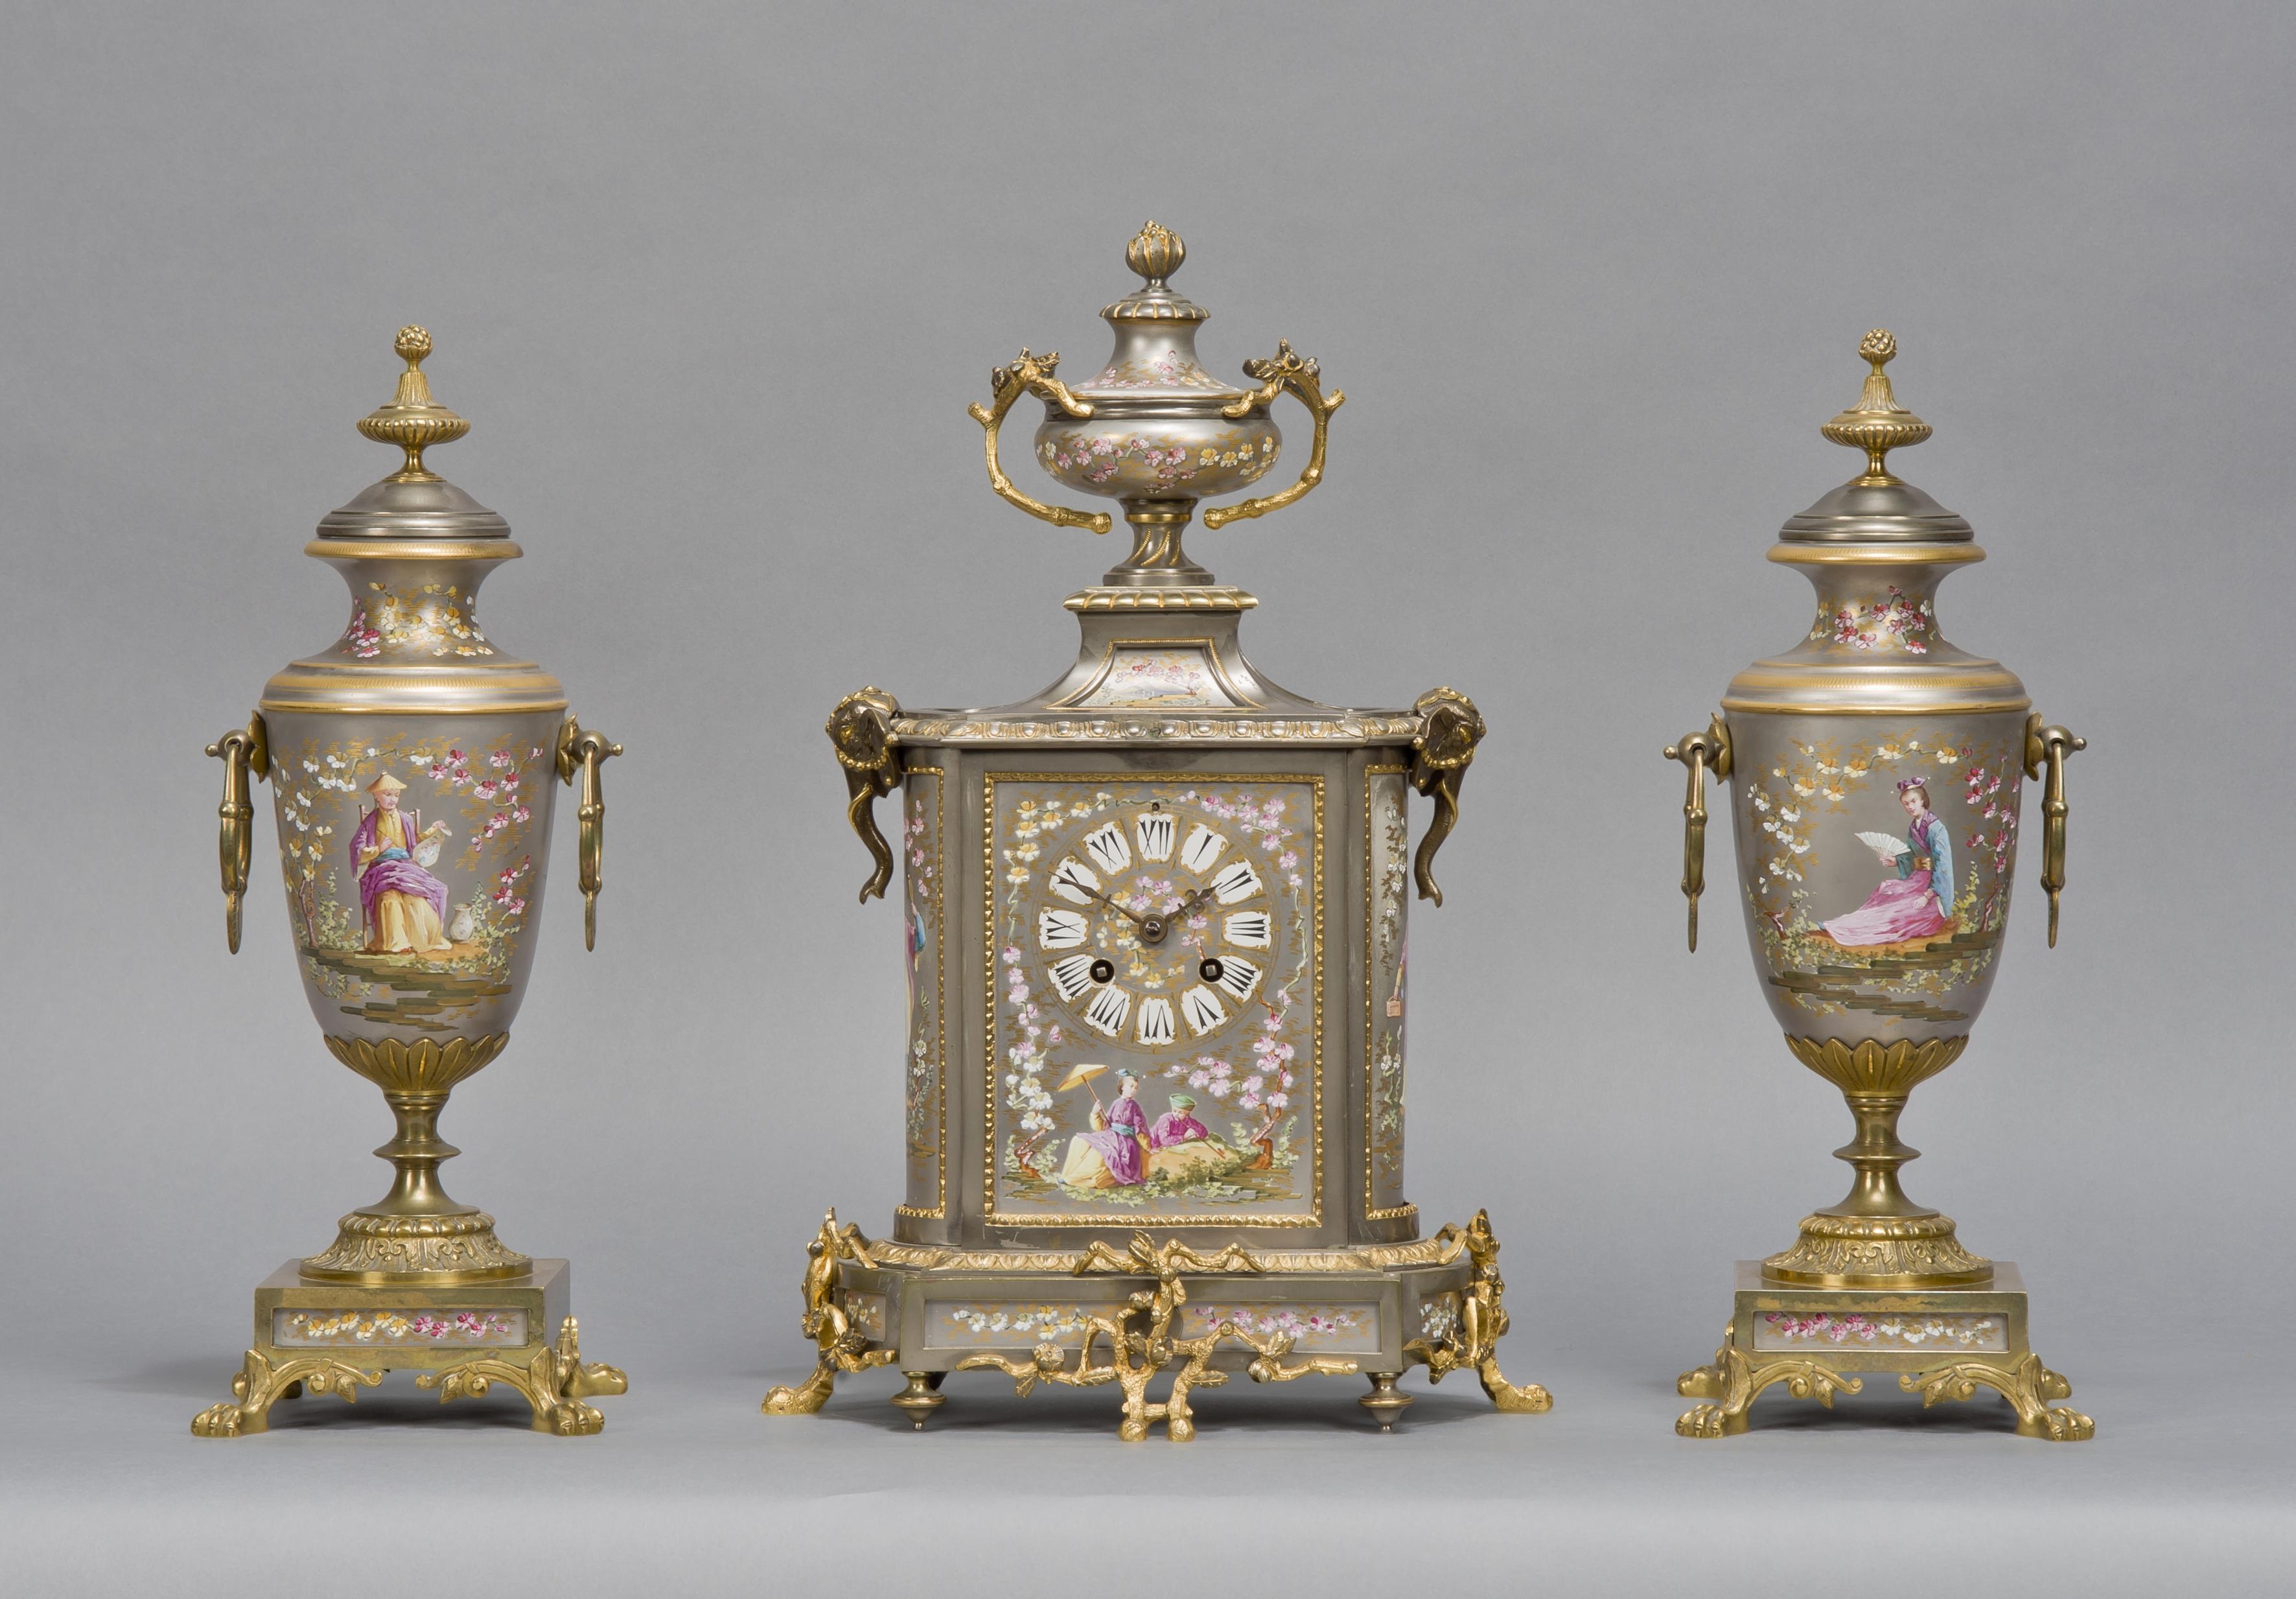 A fine Napoléon III gilt-bronze mounted porcelain clock garniture.

French, circa 1870. 

The movement stamped with the 'Japy Frères ' cachet.

This fine porcelain clock set is decorated in the Japonisme style which was popular in France from